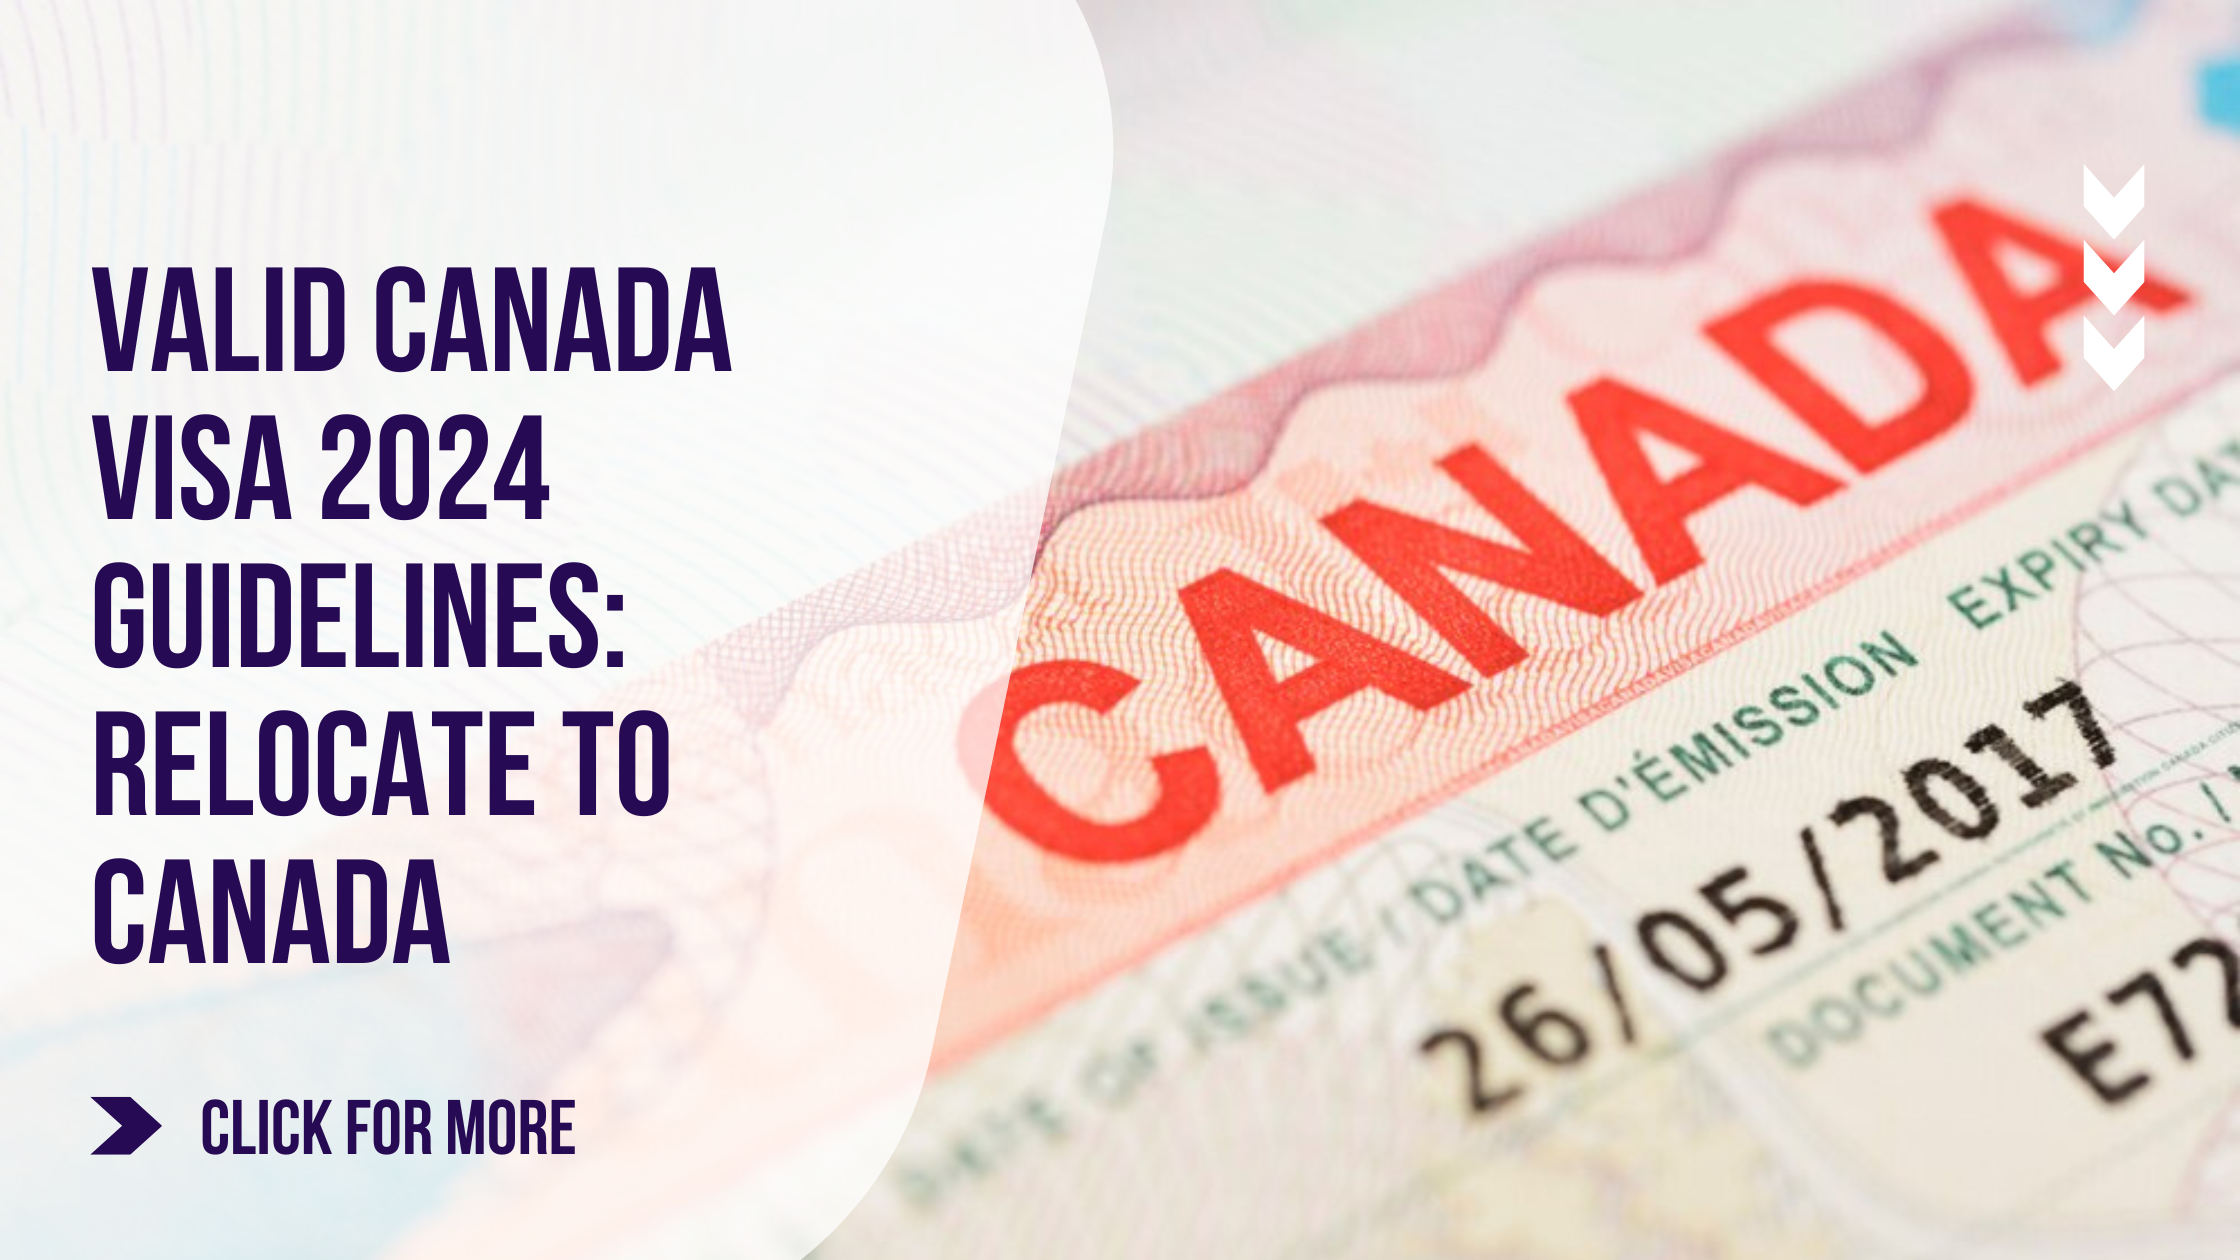 Valid Canada Visa 2024 Guidelines: Relocate to Canada